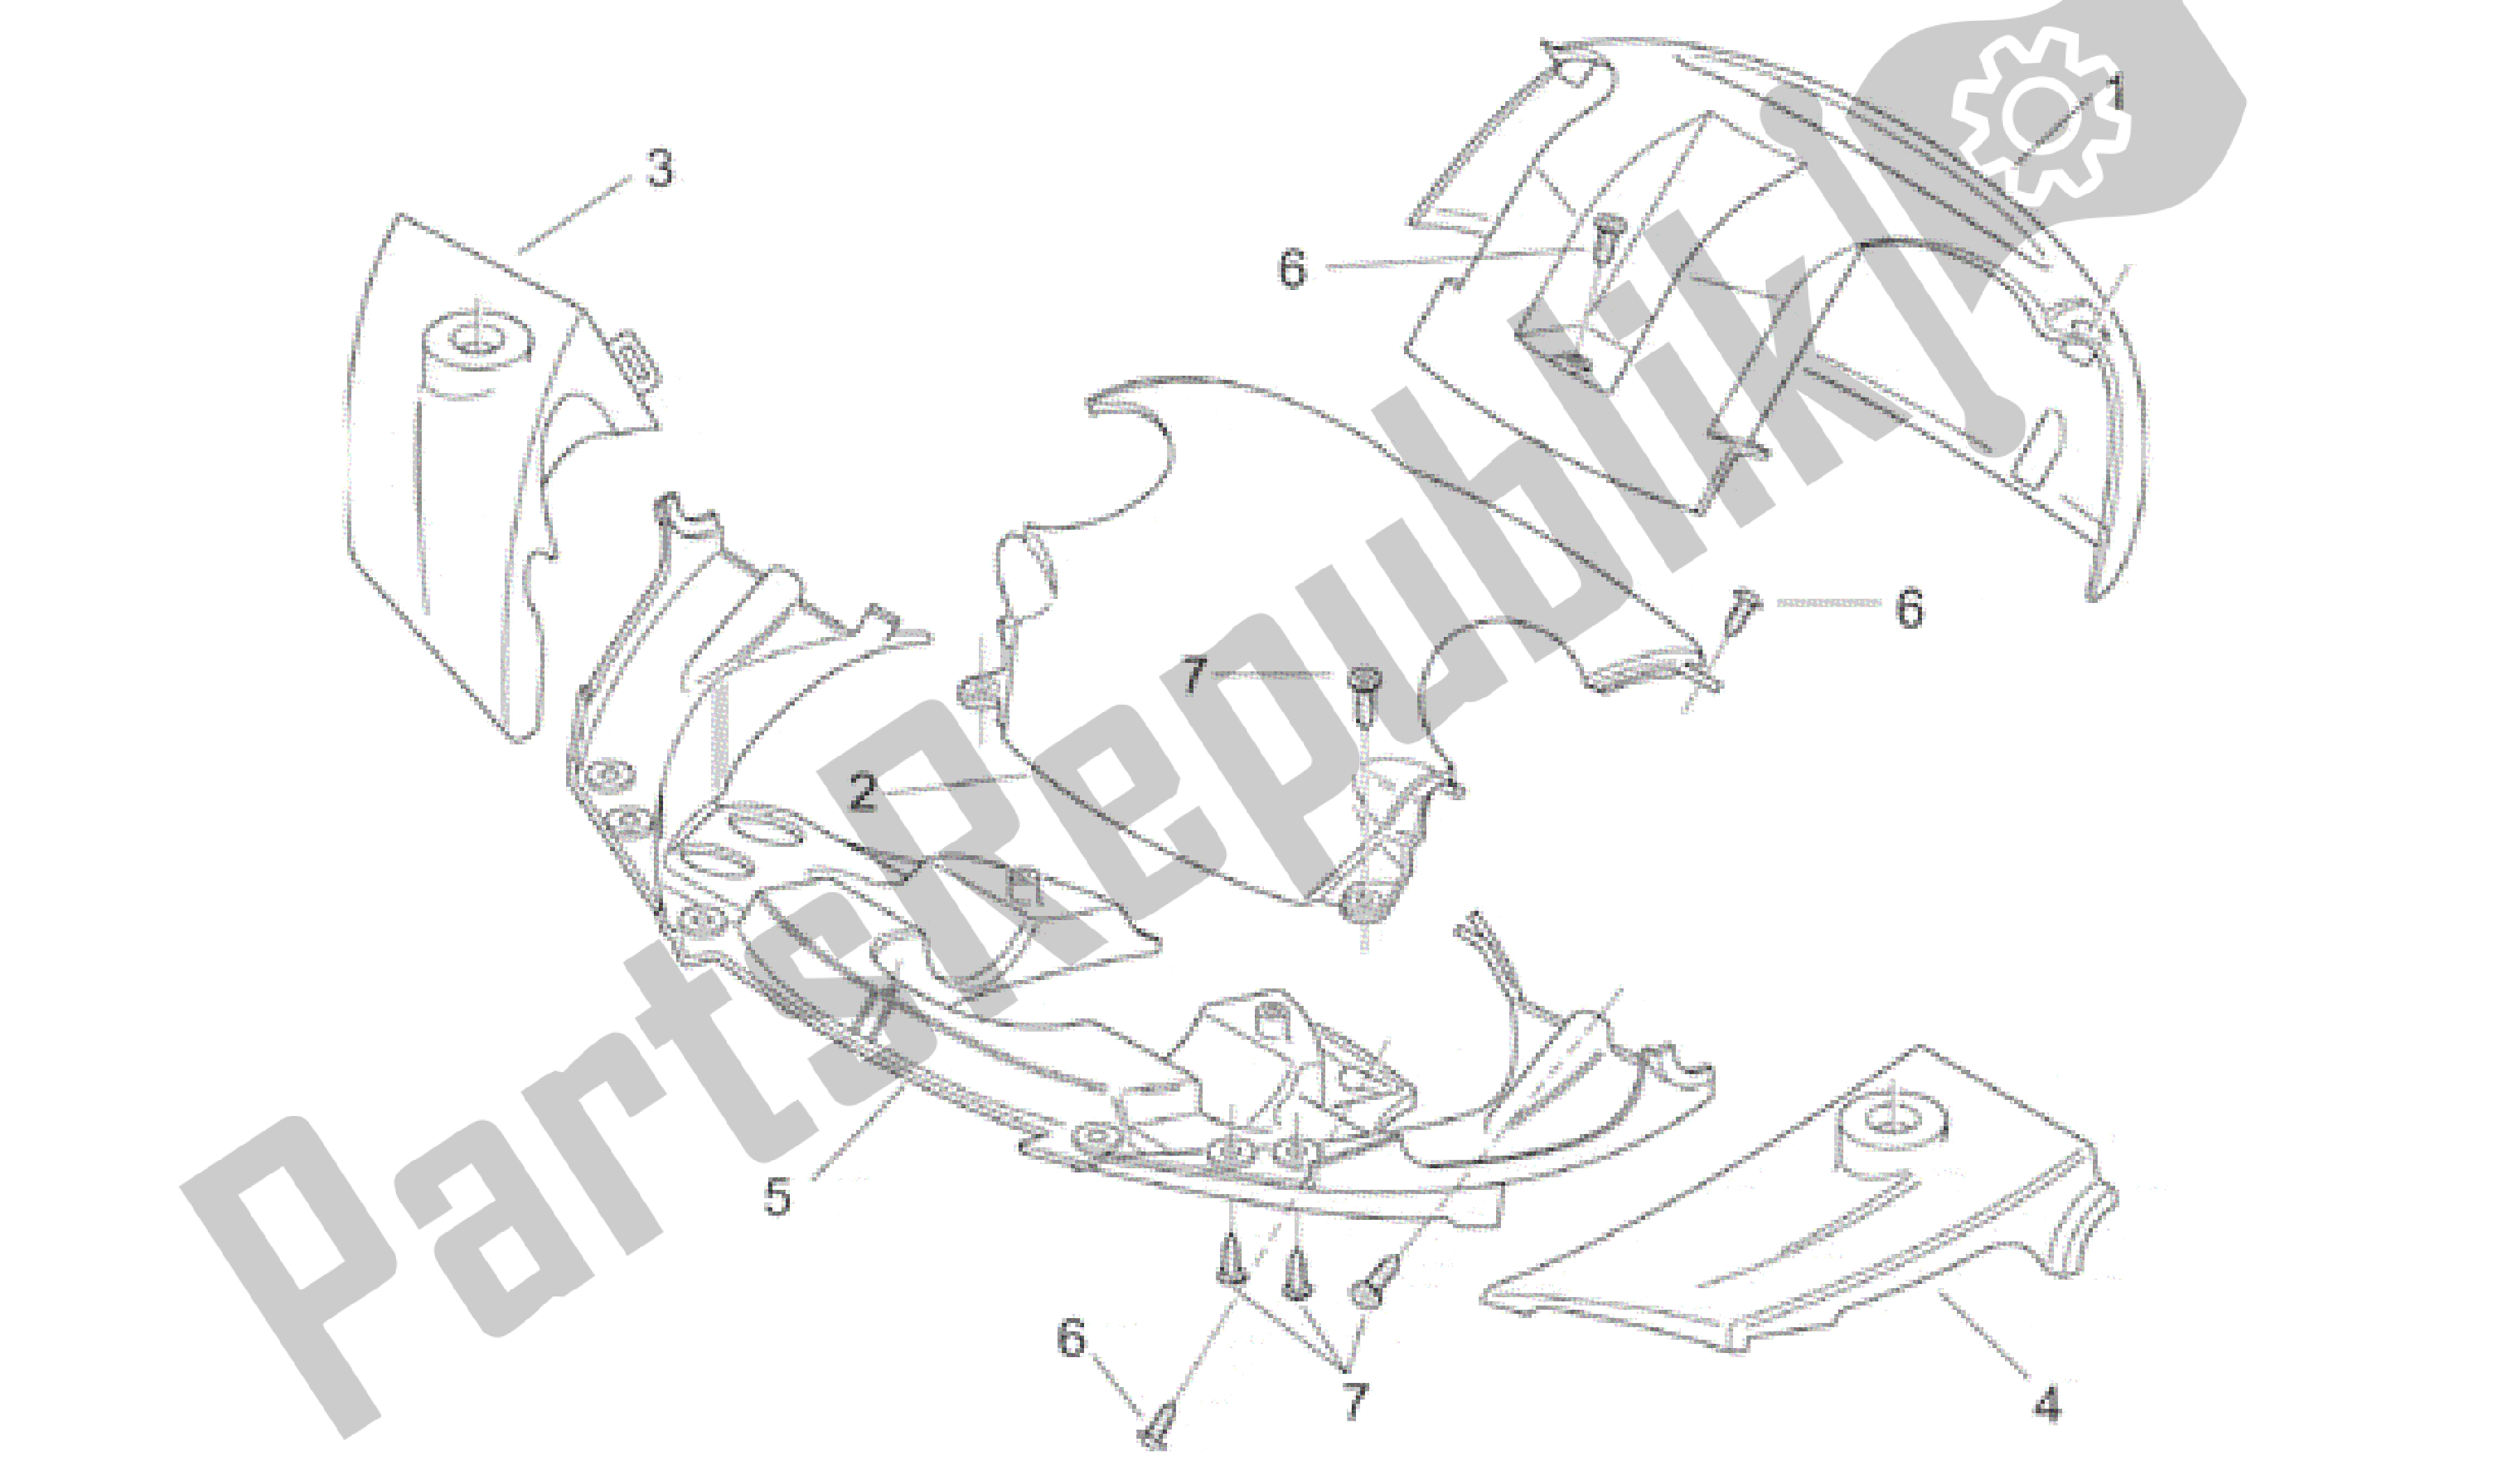 All parts for the Front Body I of the Aprilia Area 51 50 1998 - 2000